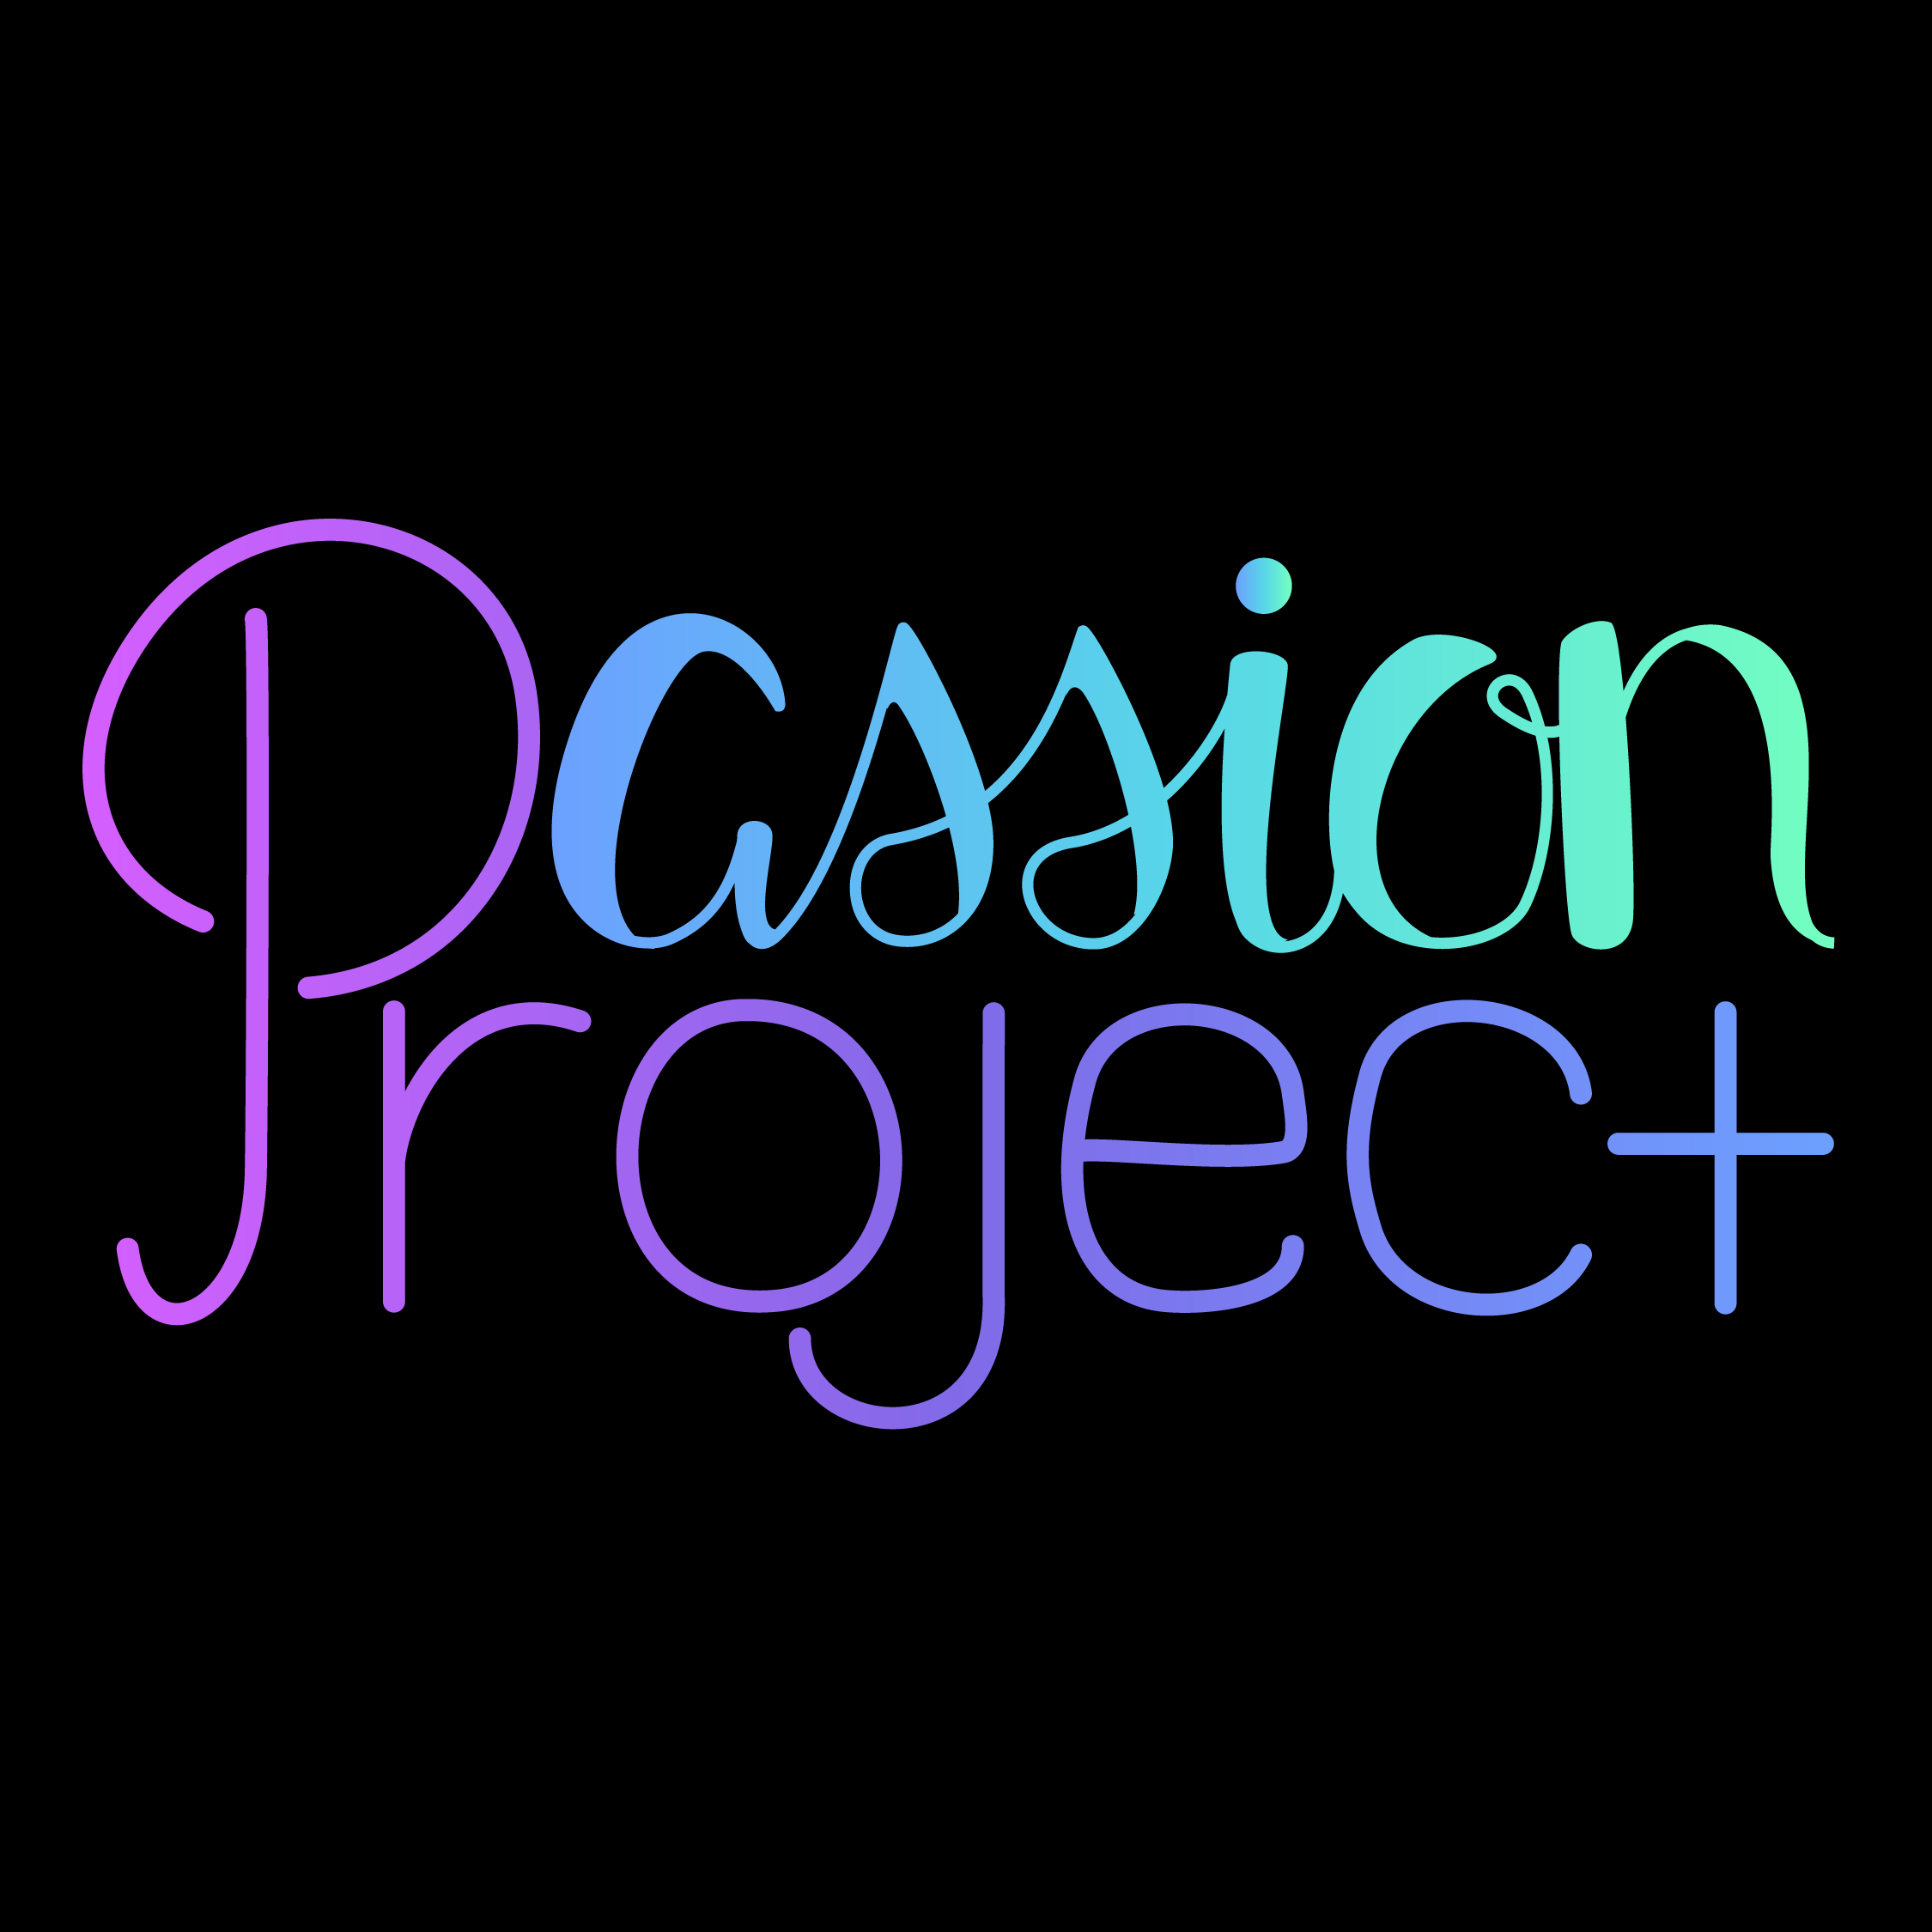 Passion_Lettering-01.png